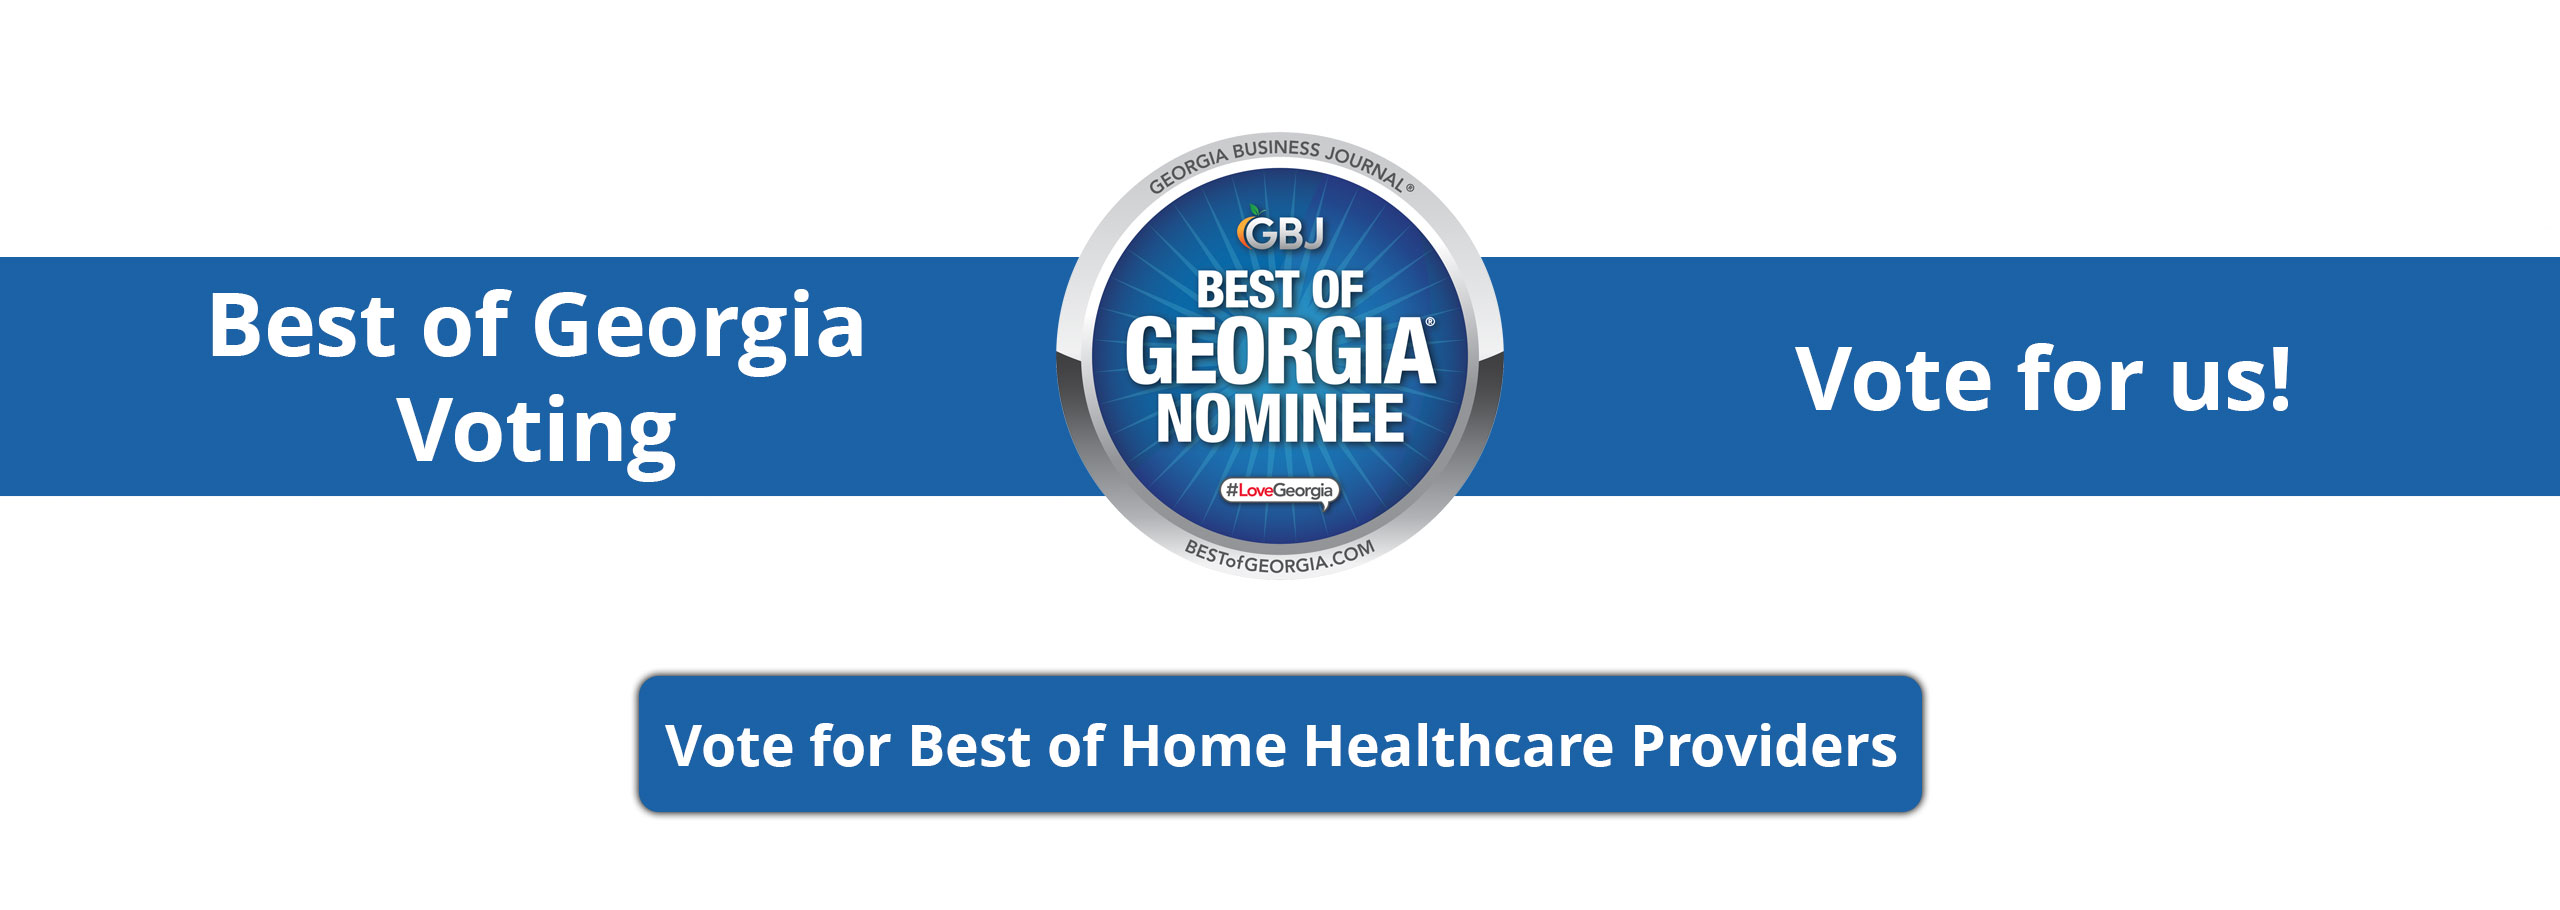 Best of Georgia Voting
Vote for us!

Vote for Best of Home Healthcare Providers

GBJ
BEST OF GEORGIA NOMMINEE